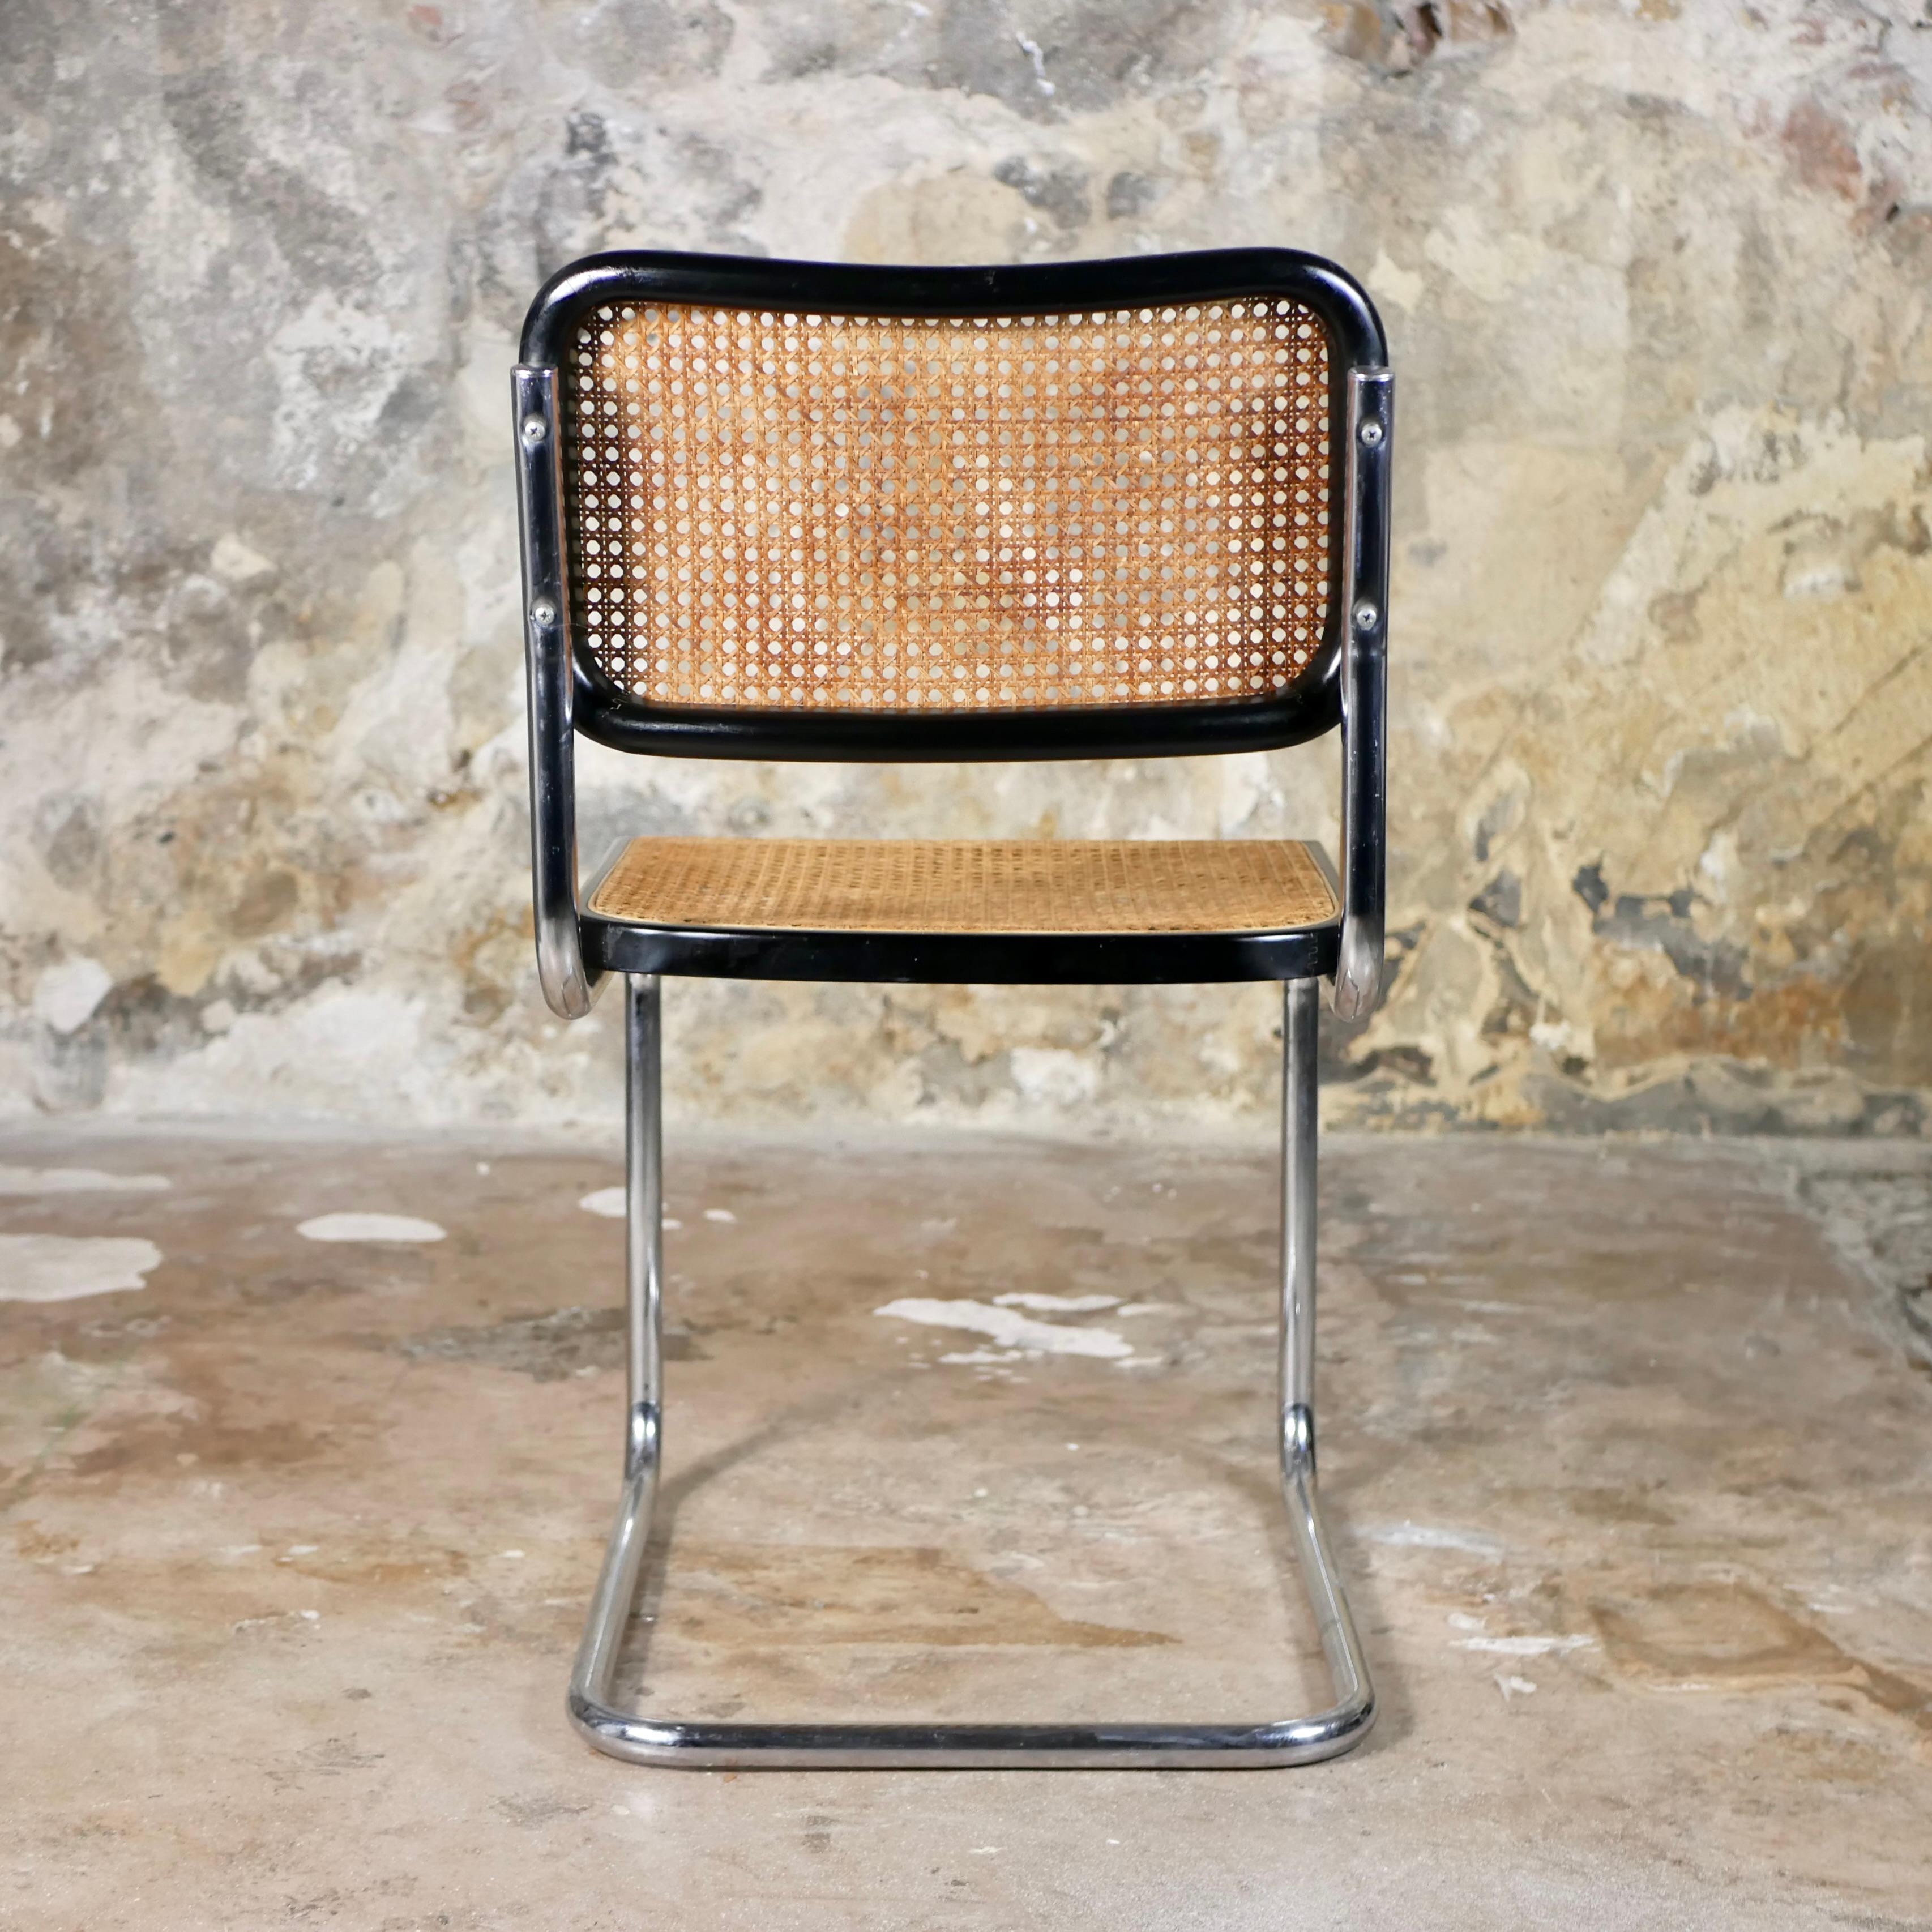 Cane Cesca chair designed by Marcel Breuer, made in Italy, 1970